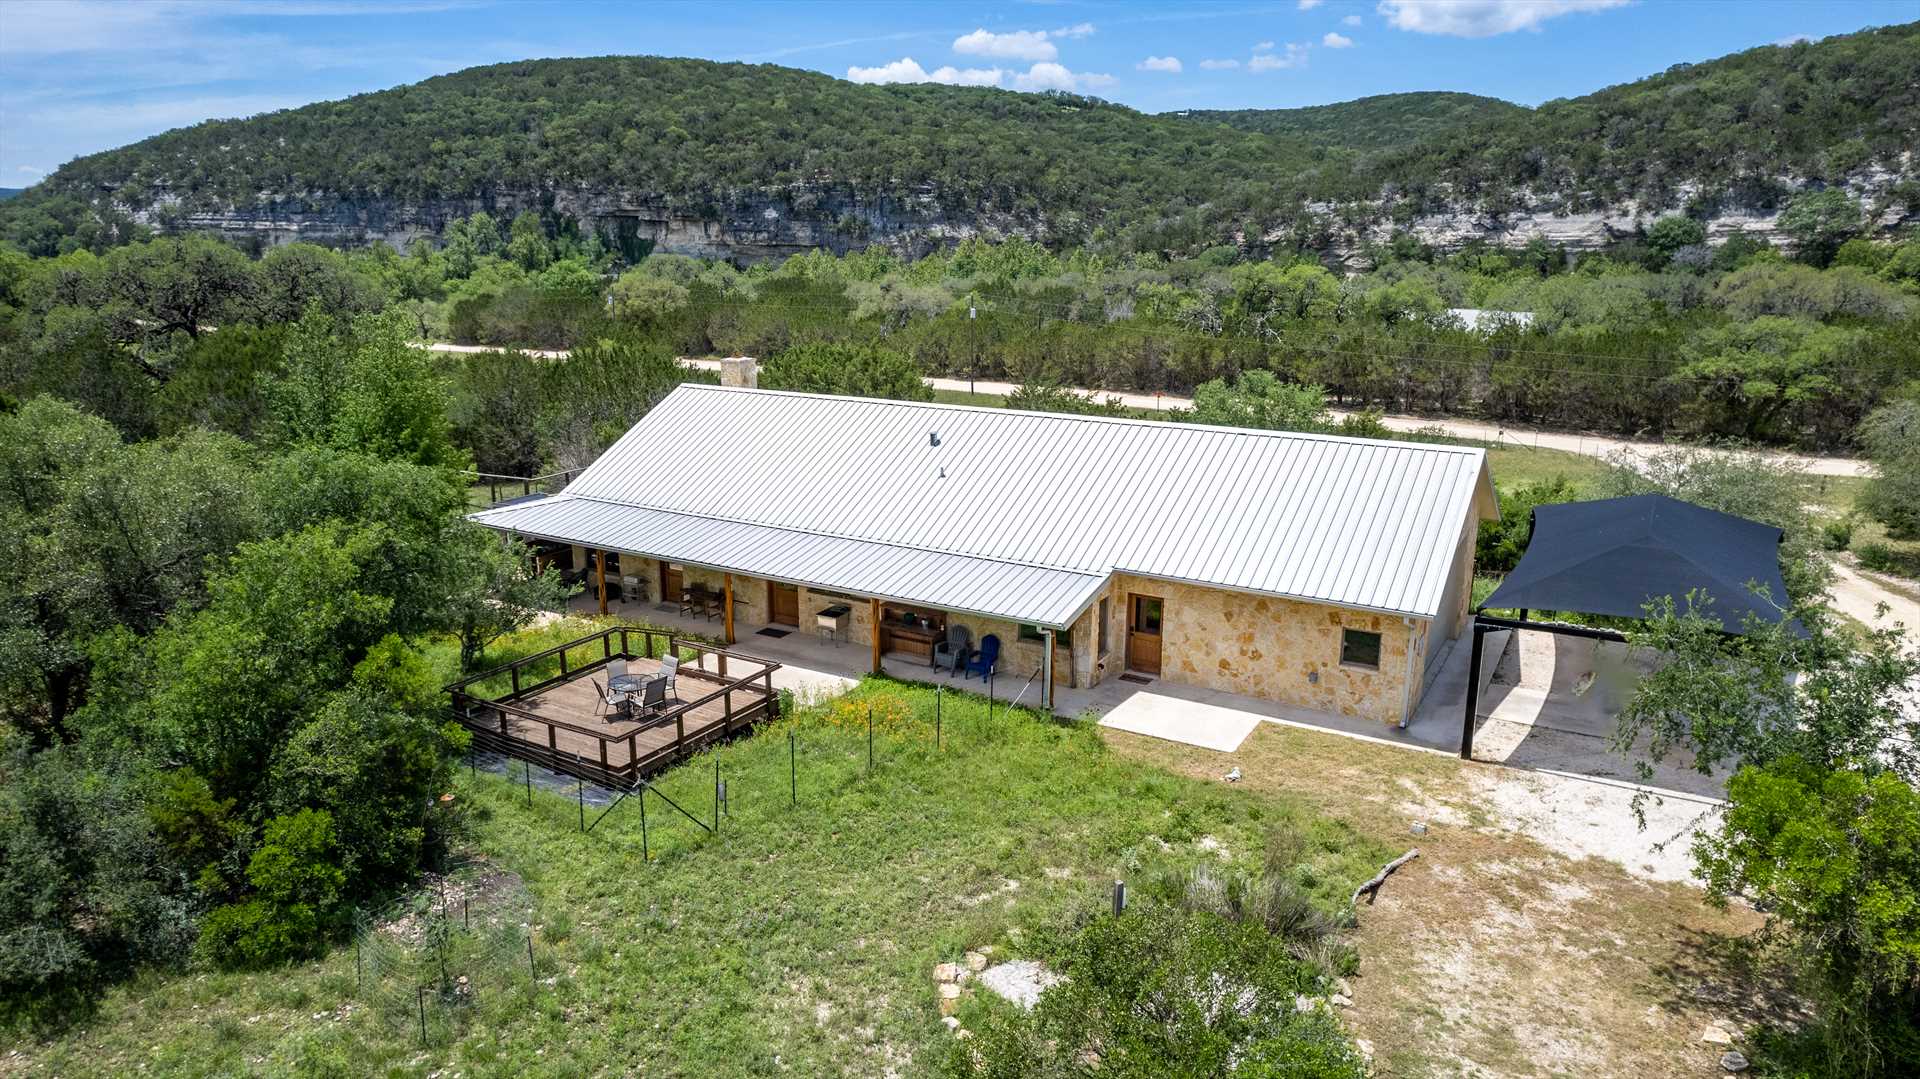                                                 Ten acres of outdoor space, and accommodation for up to ten people inside, make Roadrunner Canyon Ranch an ideal Hill Country getaway for the whole family!